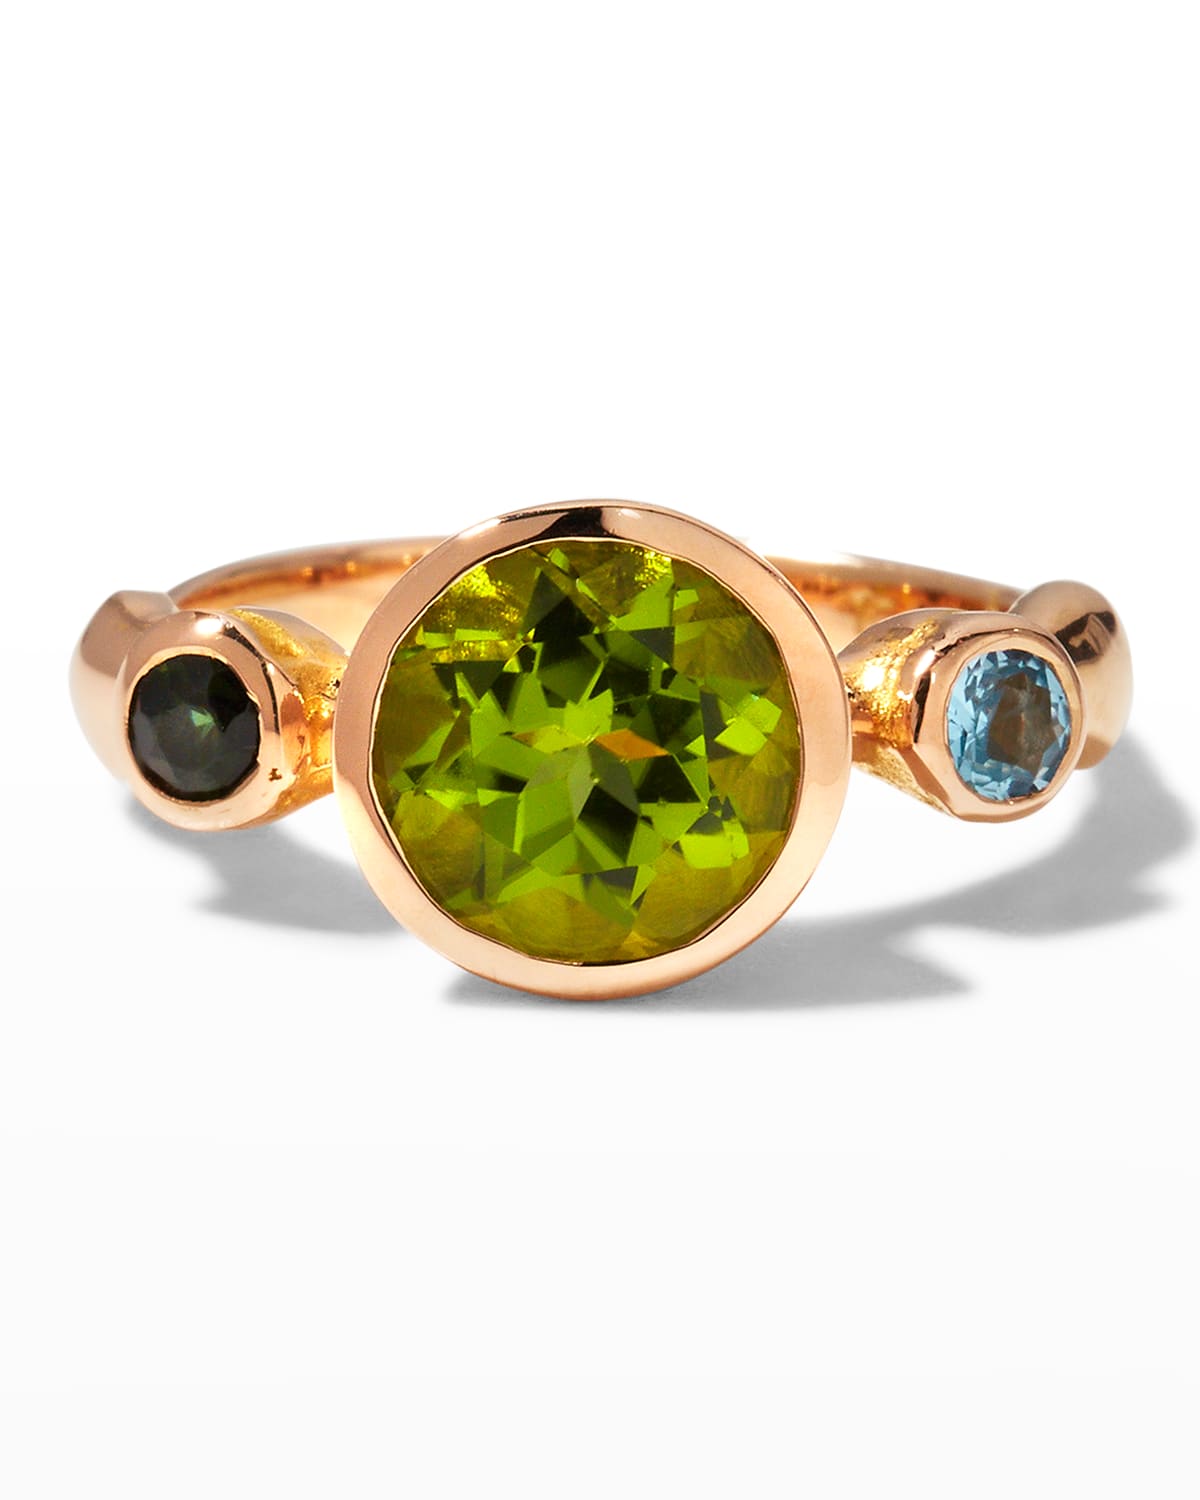 Lee Brevard Rose Gold Sybil Ring with Peridot, Tourmaline and Topaz